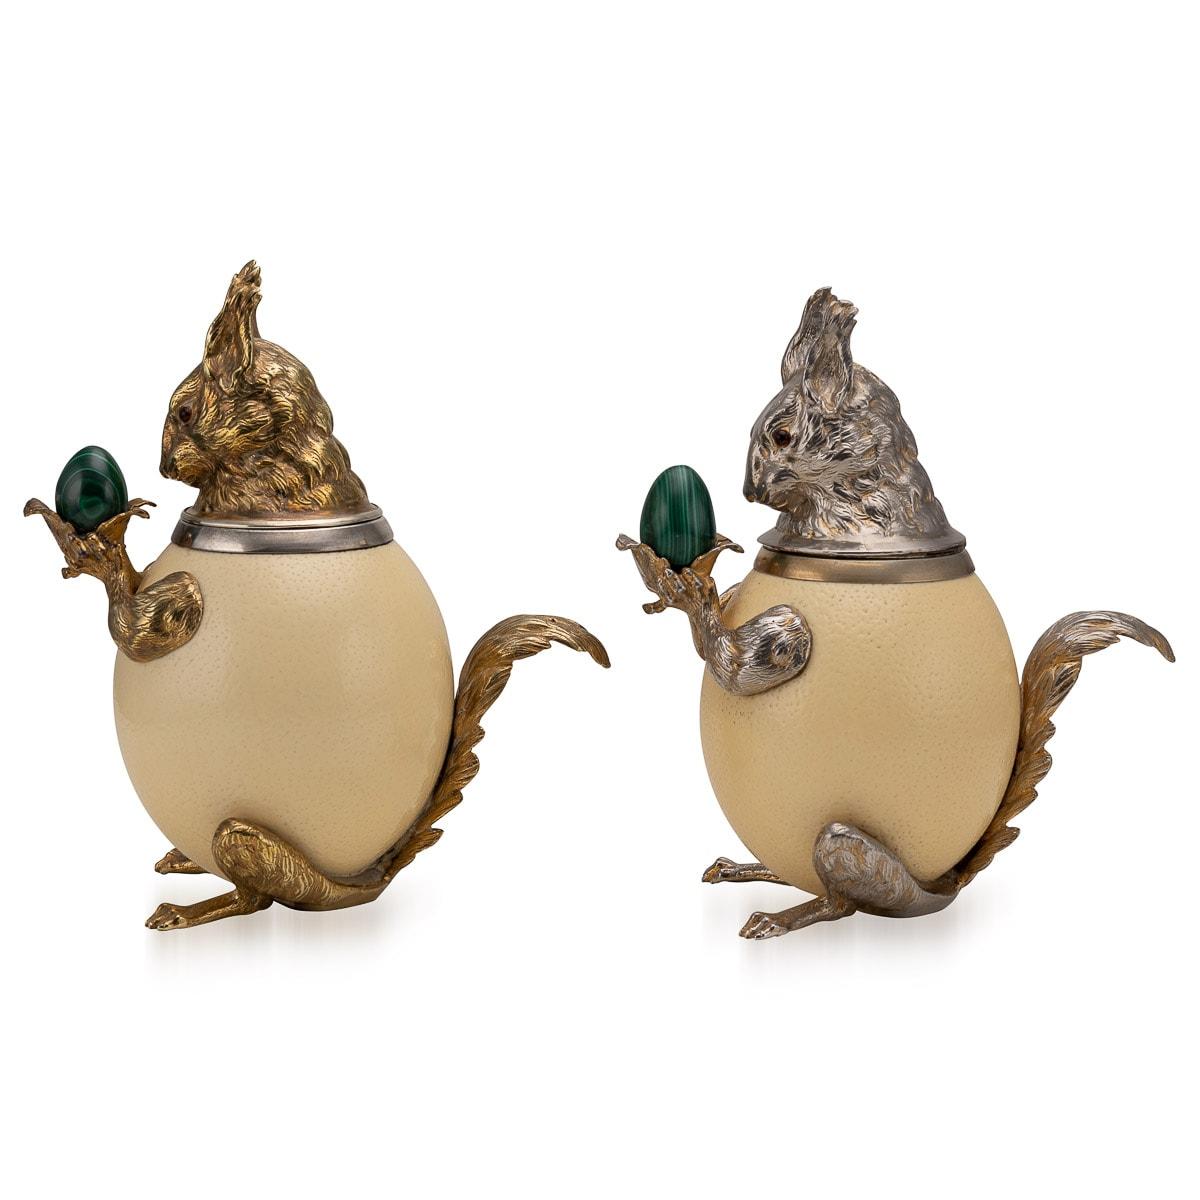 These fantastical squirrels are created by Anthony Redmile, silver plated and gilded heads, feet and tail mounted with an ostrich egg for a body and each holding a solid malachite nut in its paws. Redmiles love of animals and nature come together in